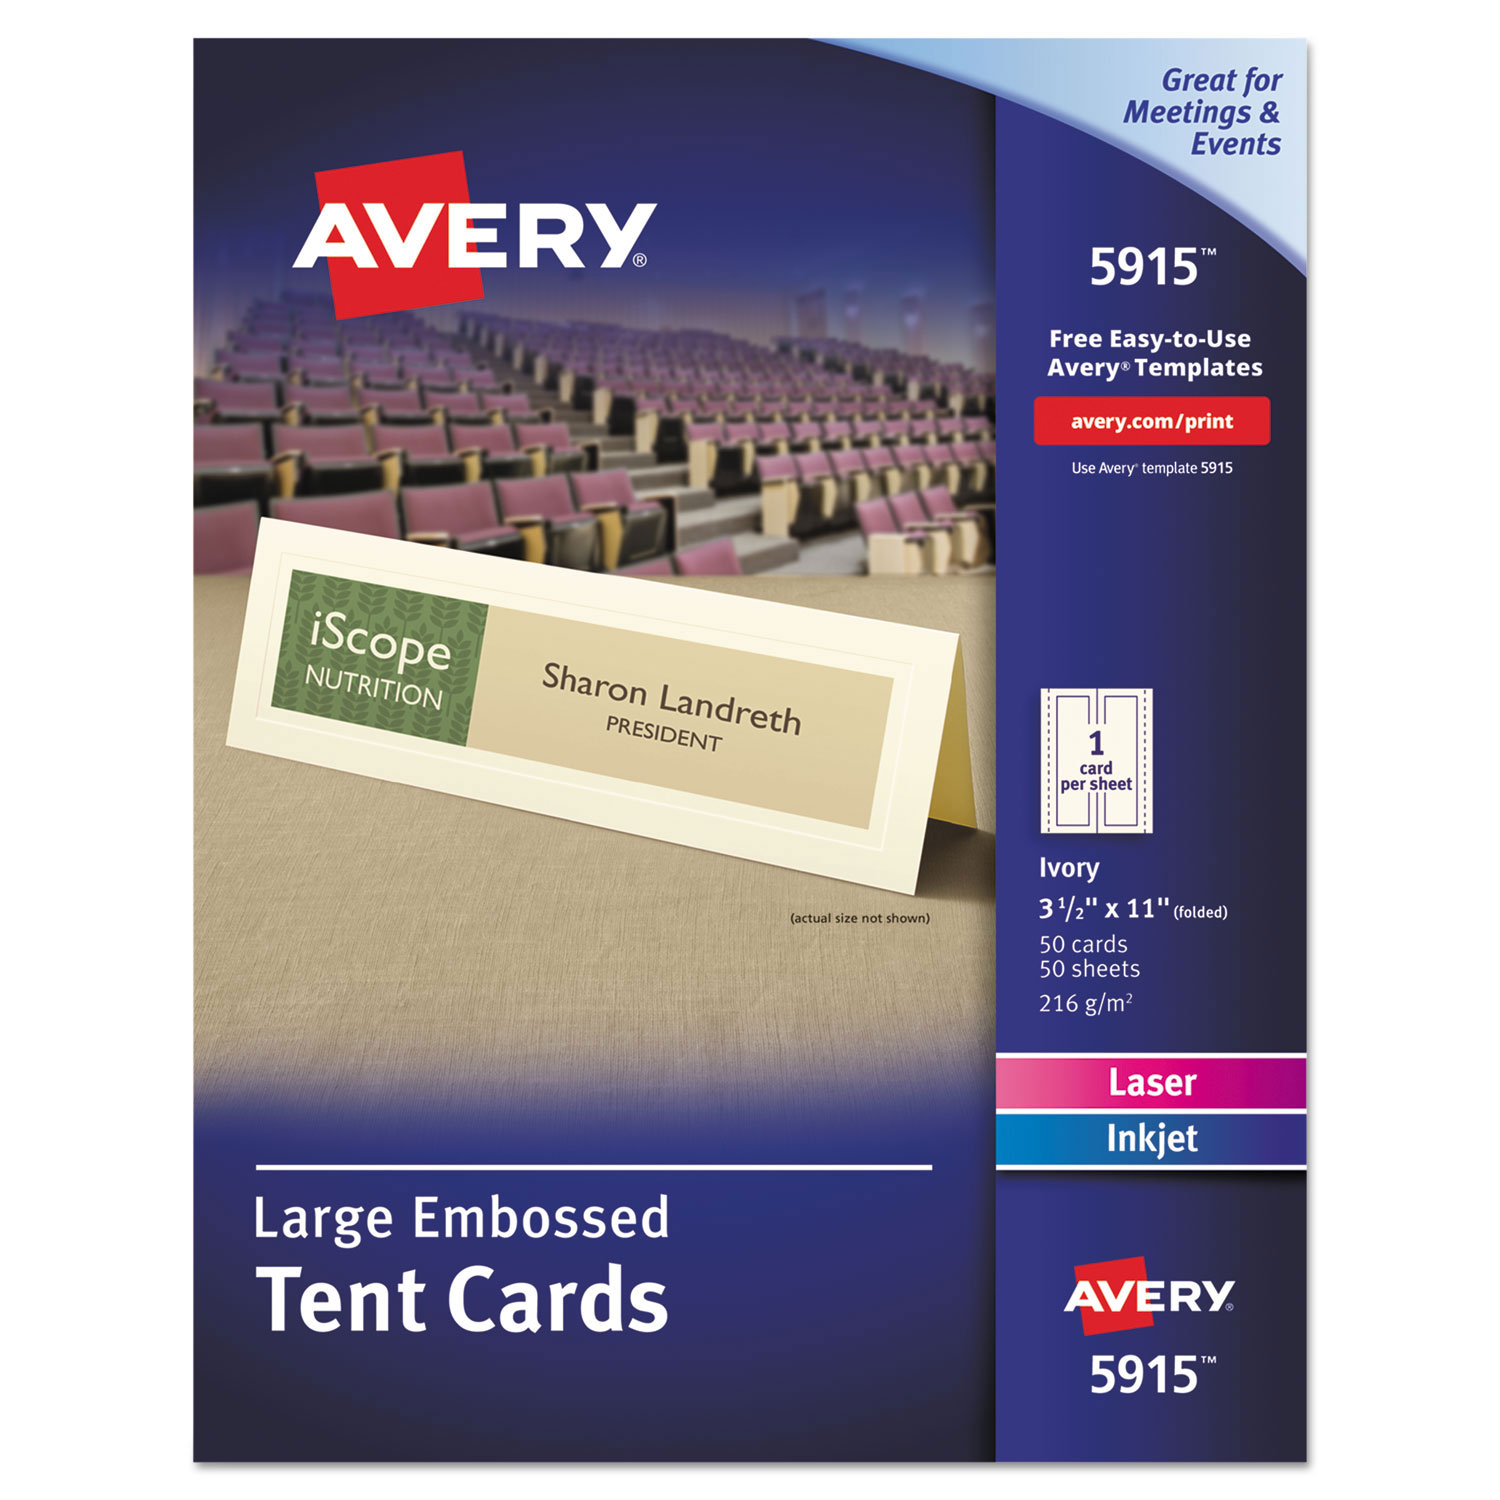 avery-large-embossed-tent-card-ivory-3-1-2-x-11-1-card-sheet-50